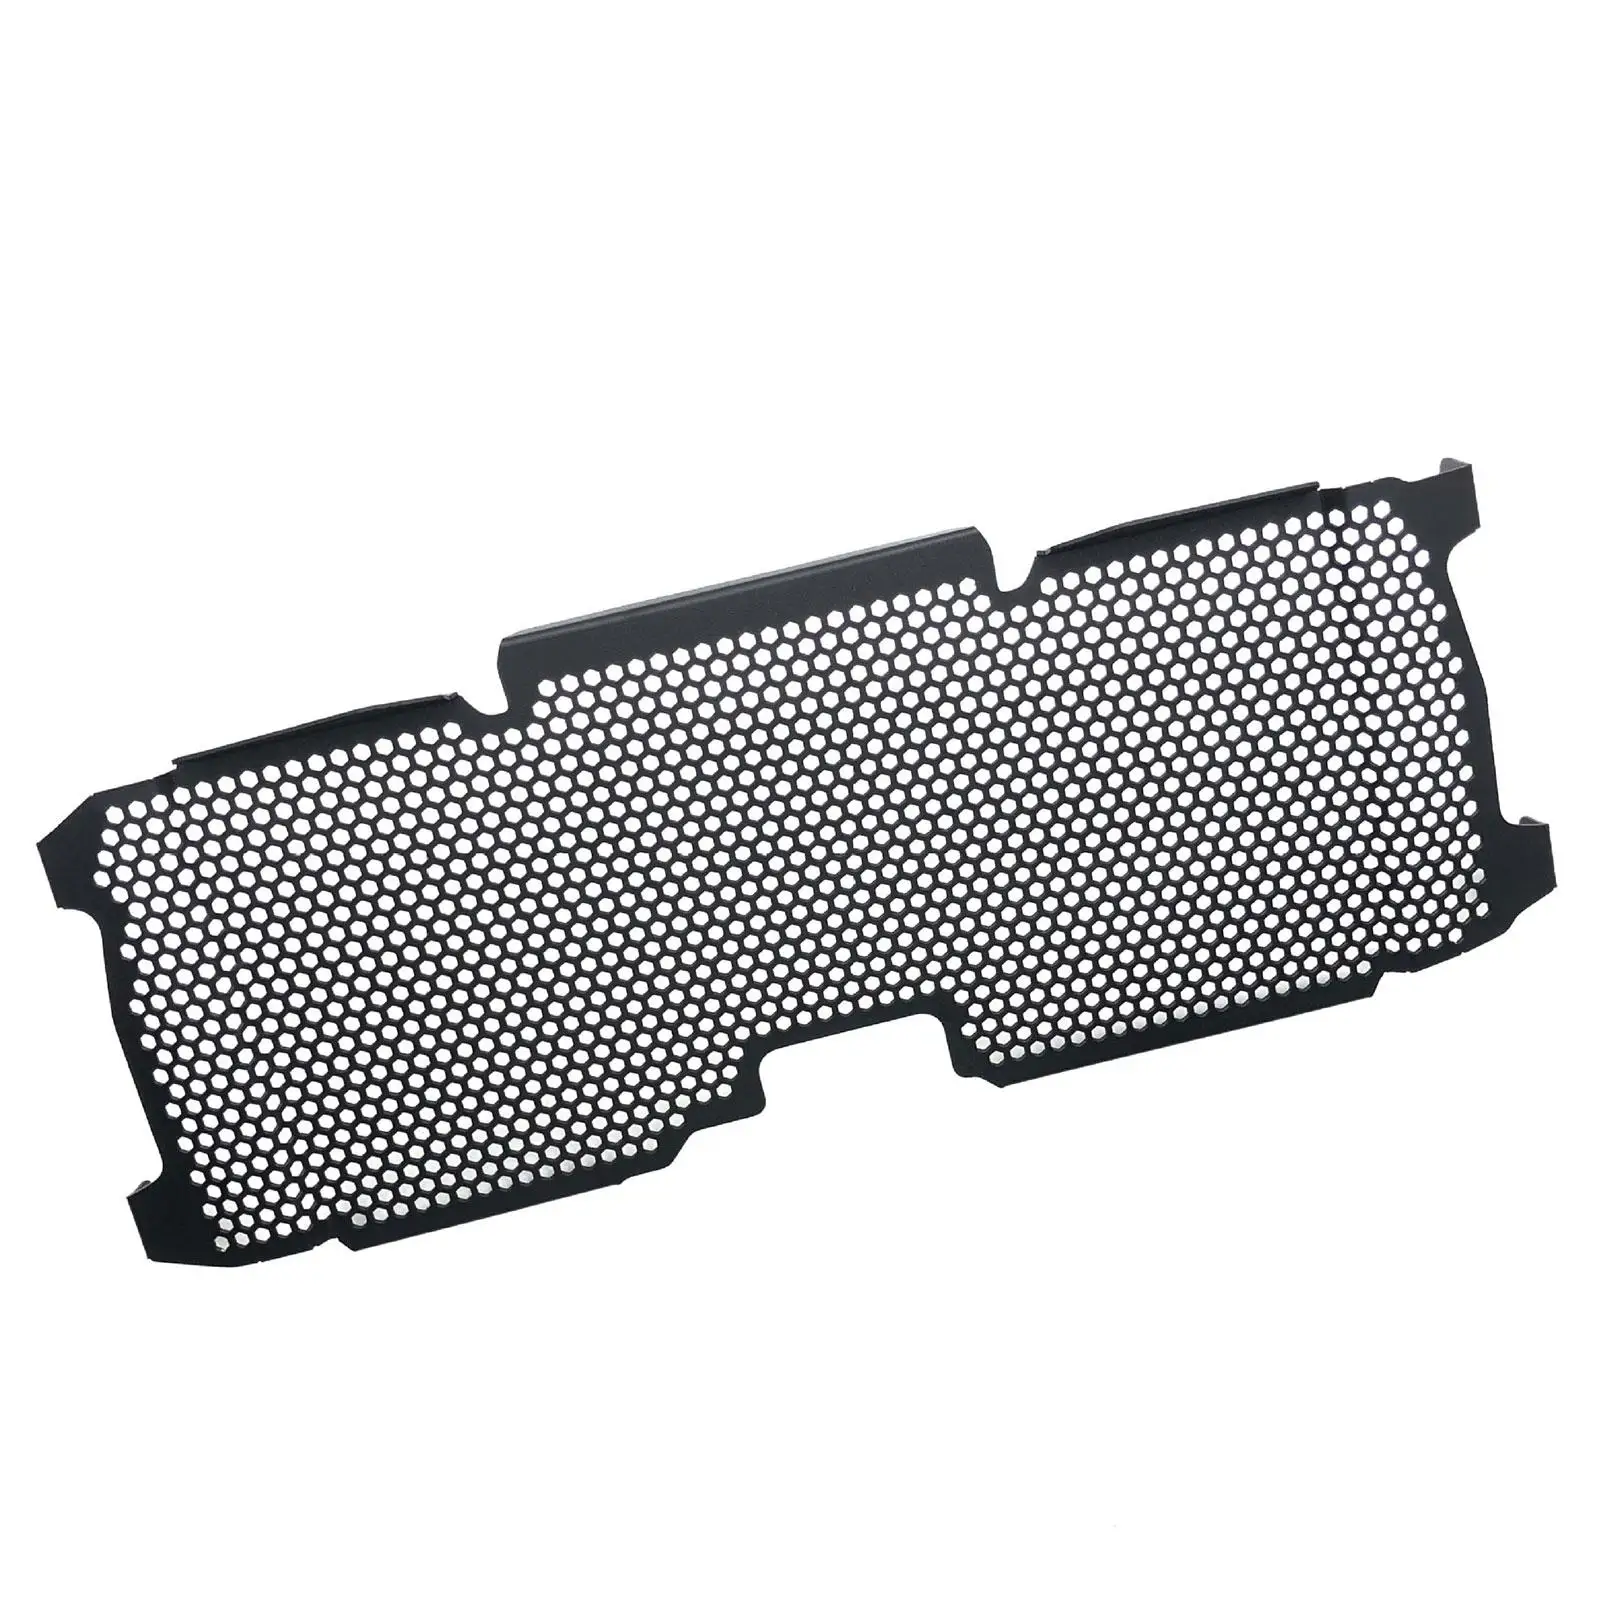 Radiator Grille Guard Protector Grill Cover Professional for BMW R1200RS 2015-2018